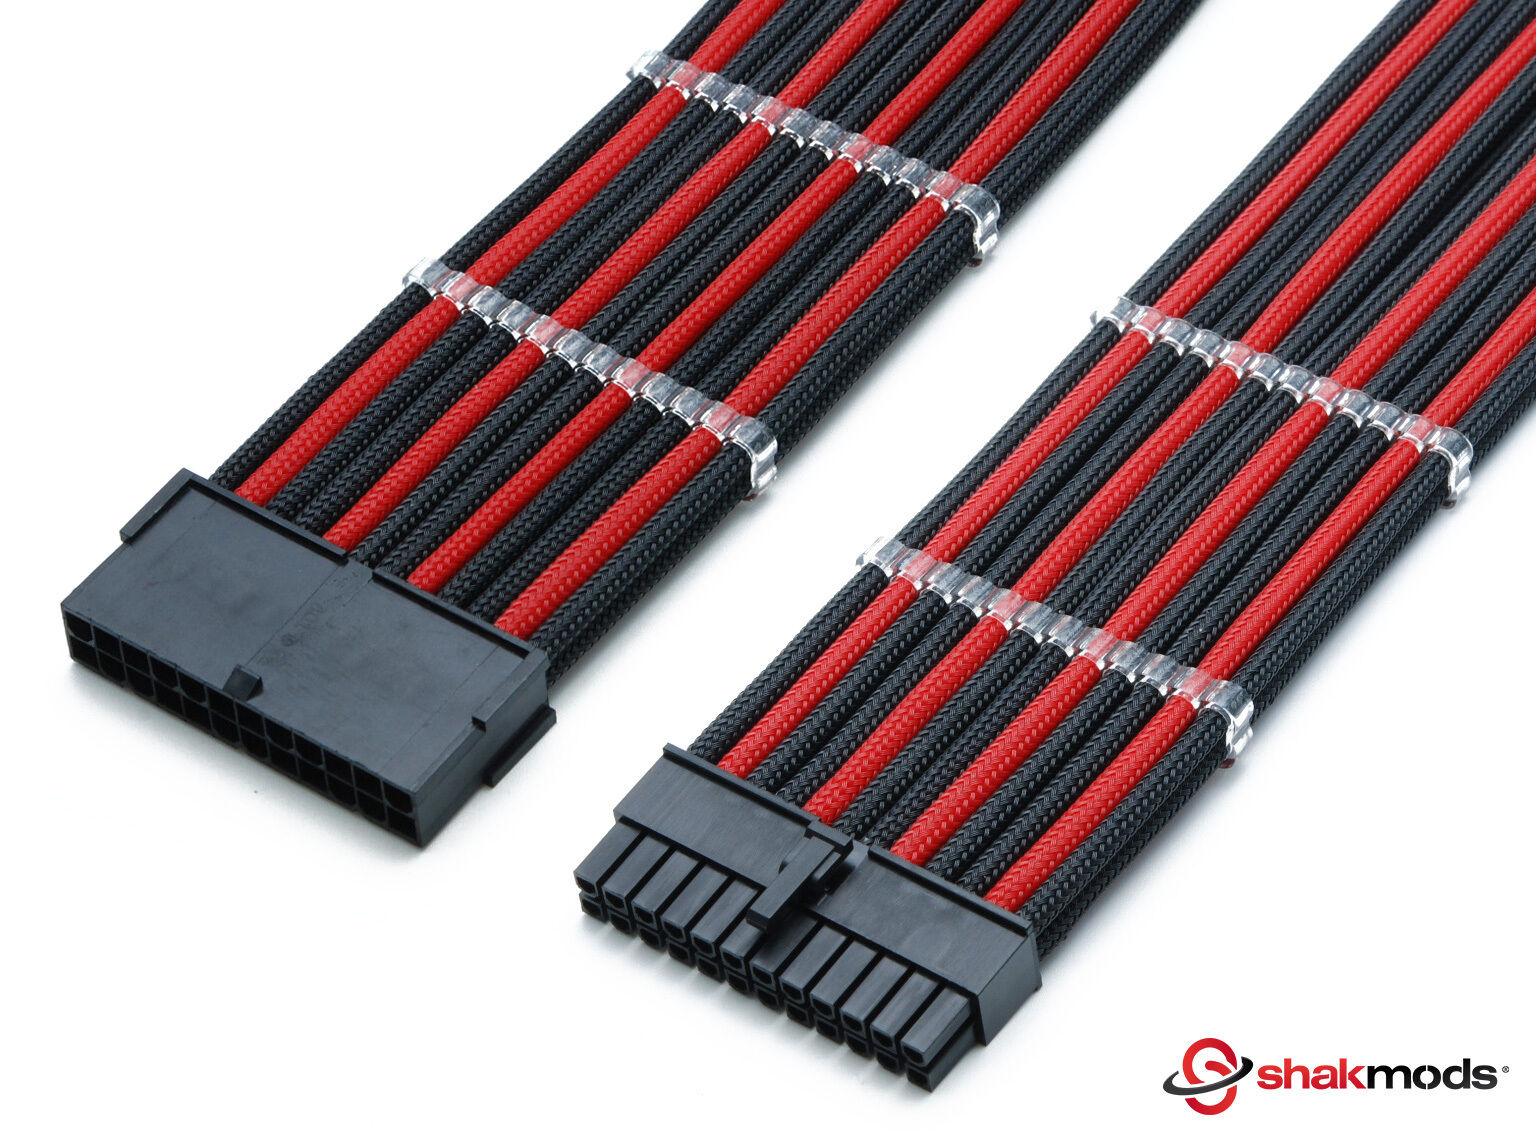 24pin ATX EPS CPU Black Red Sleeved Extension 30cm Shakmods With 2 Cable Combs